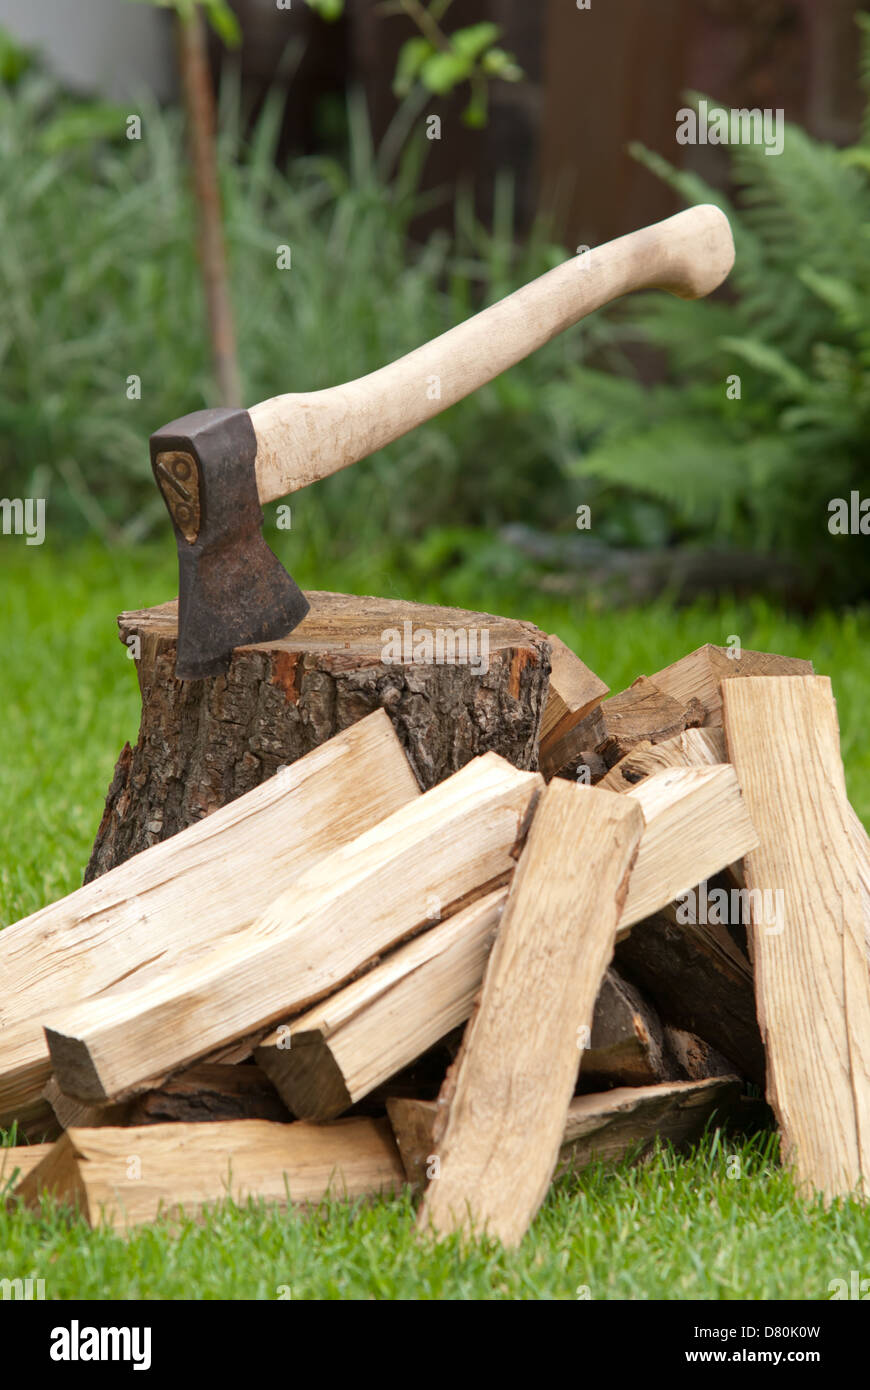 ax and firewood Stock Photo